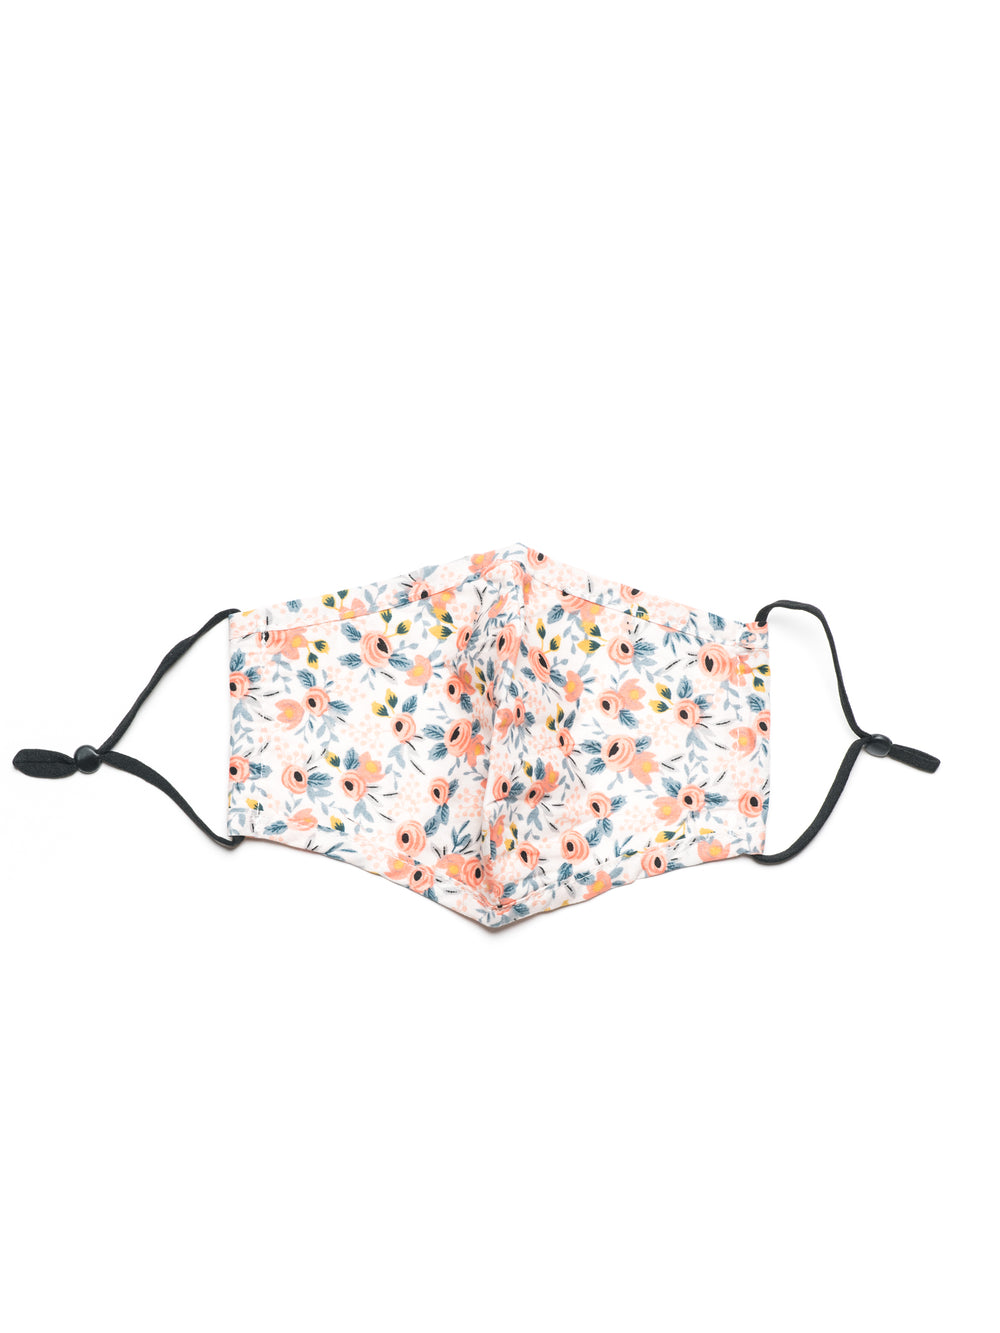 KW FASHION CORP FLORAL MASK - WHITE - CLEARANCE